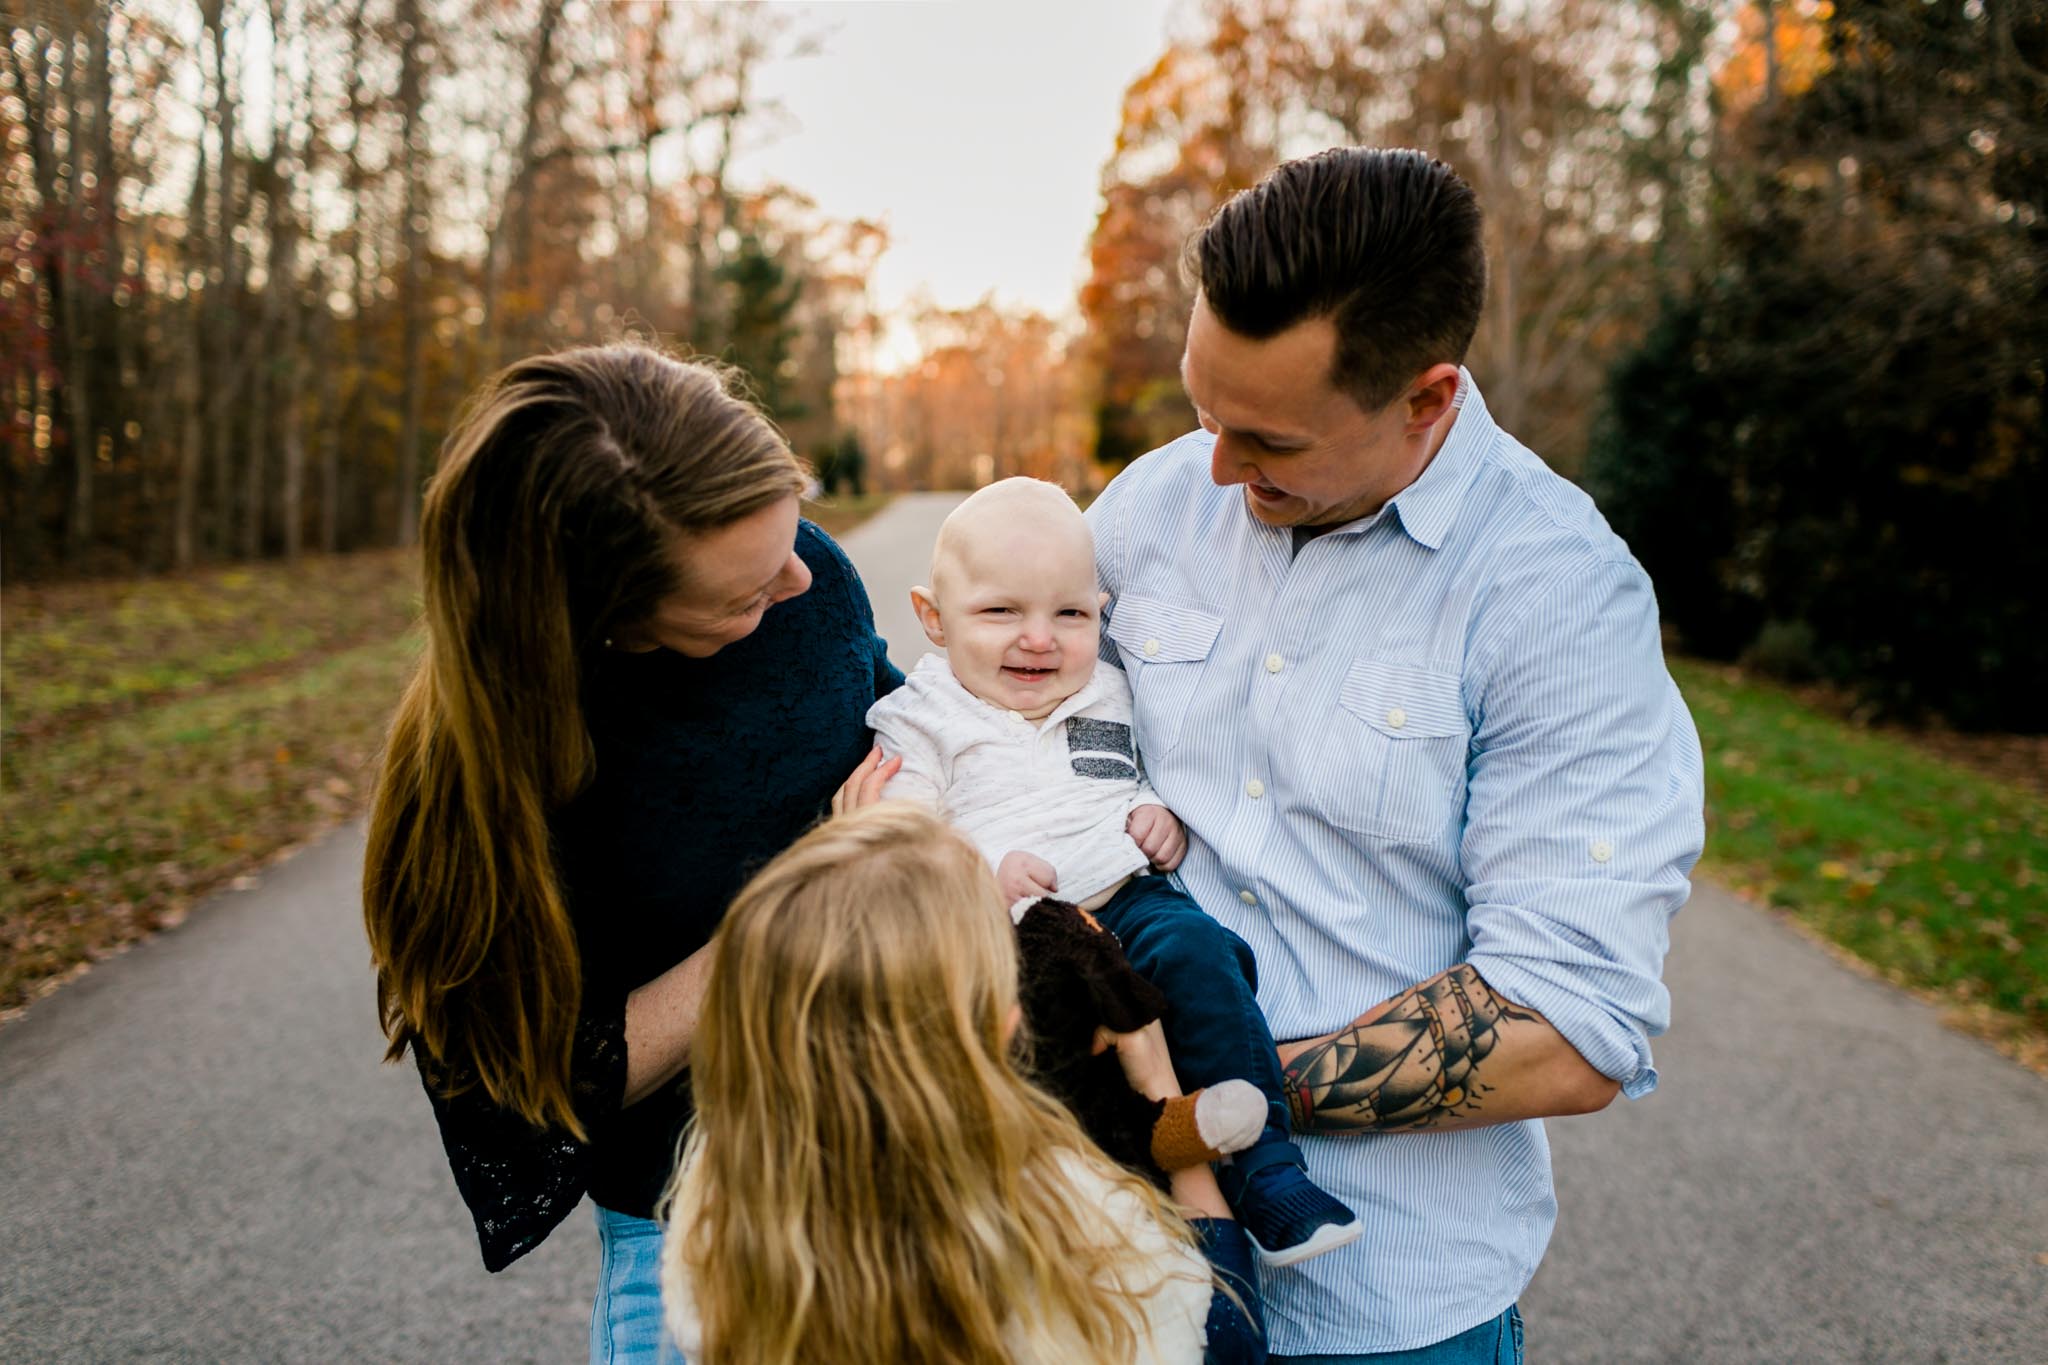 Candid family photo outside | By G. Lin Photography | Raleigh Photographer